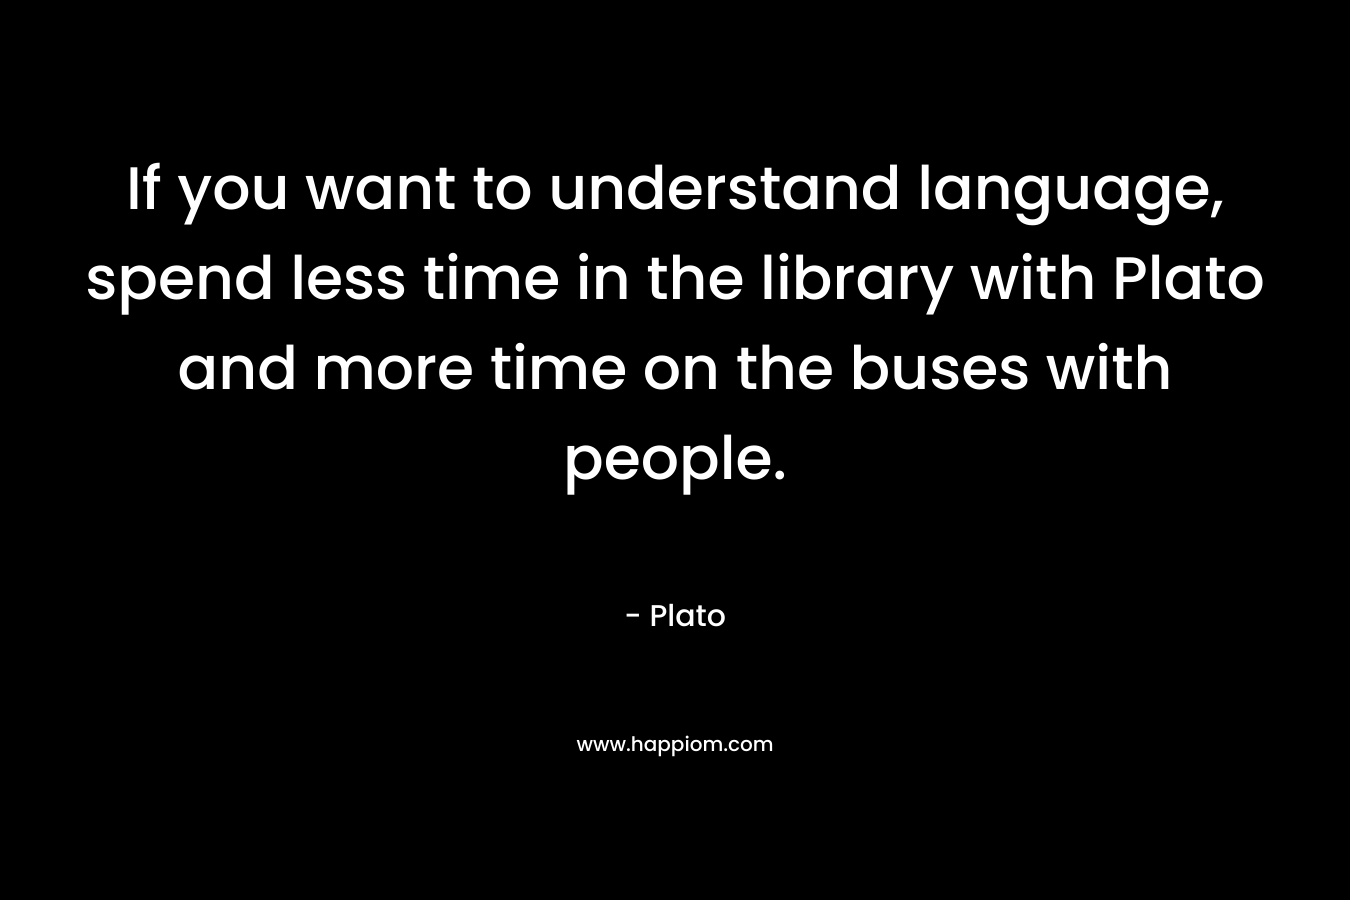 If you want to understand language, spend less time in the library with Plato and more time on the buses with people.